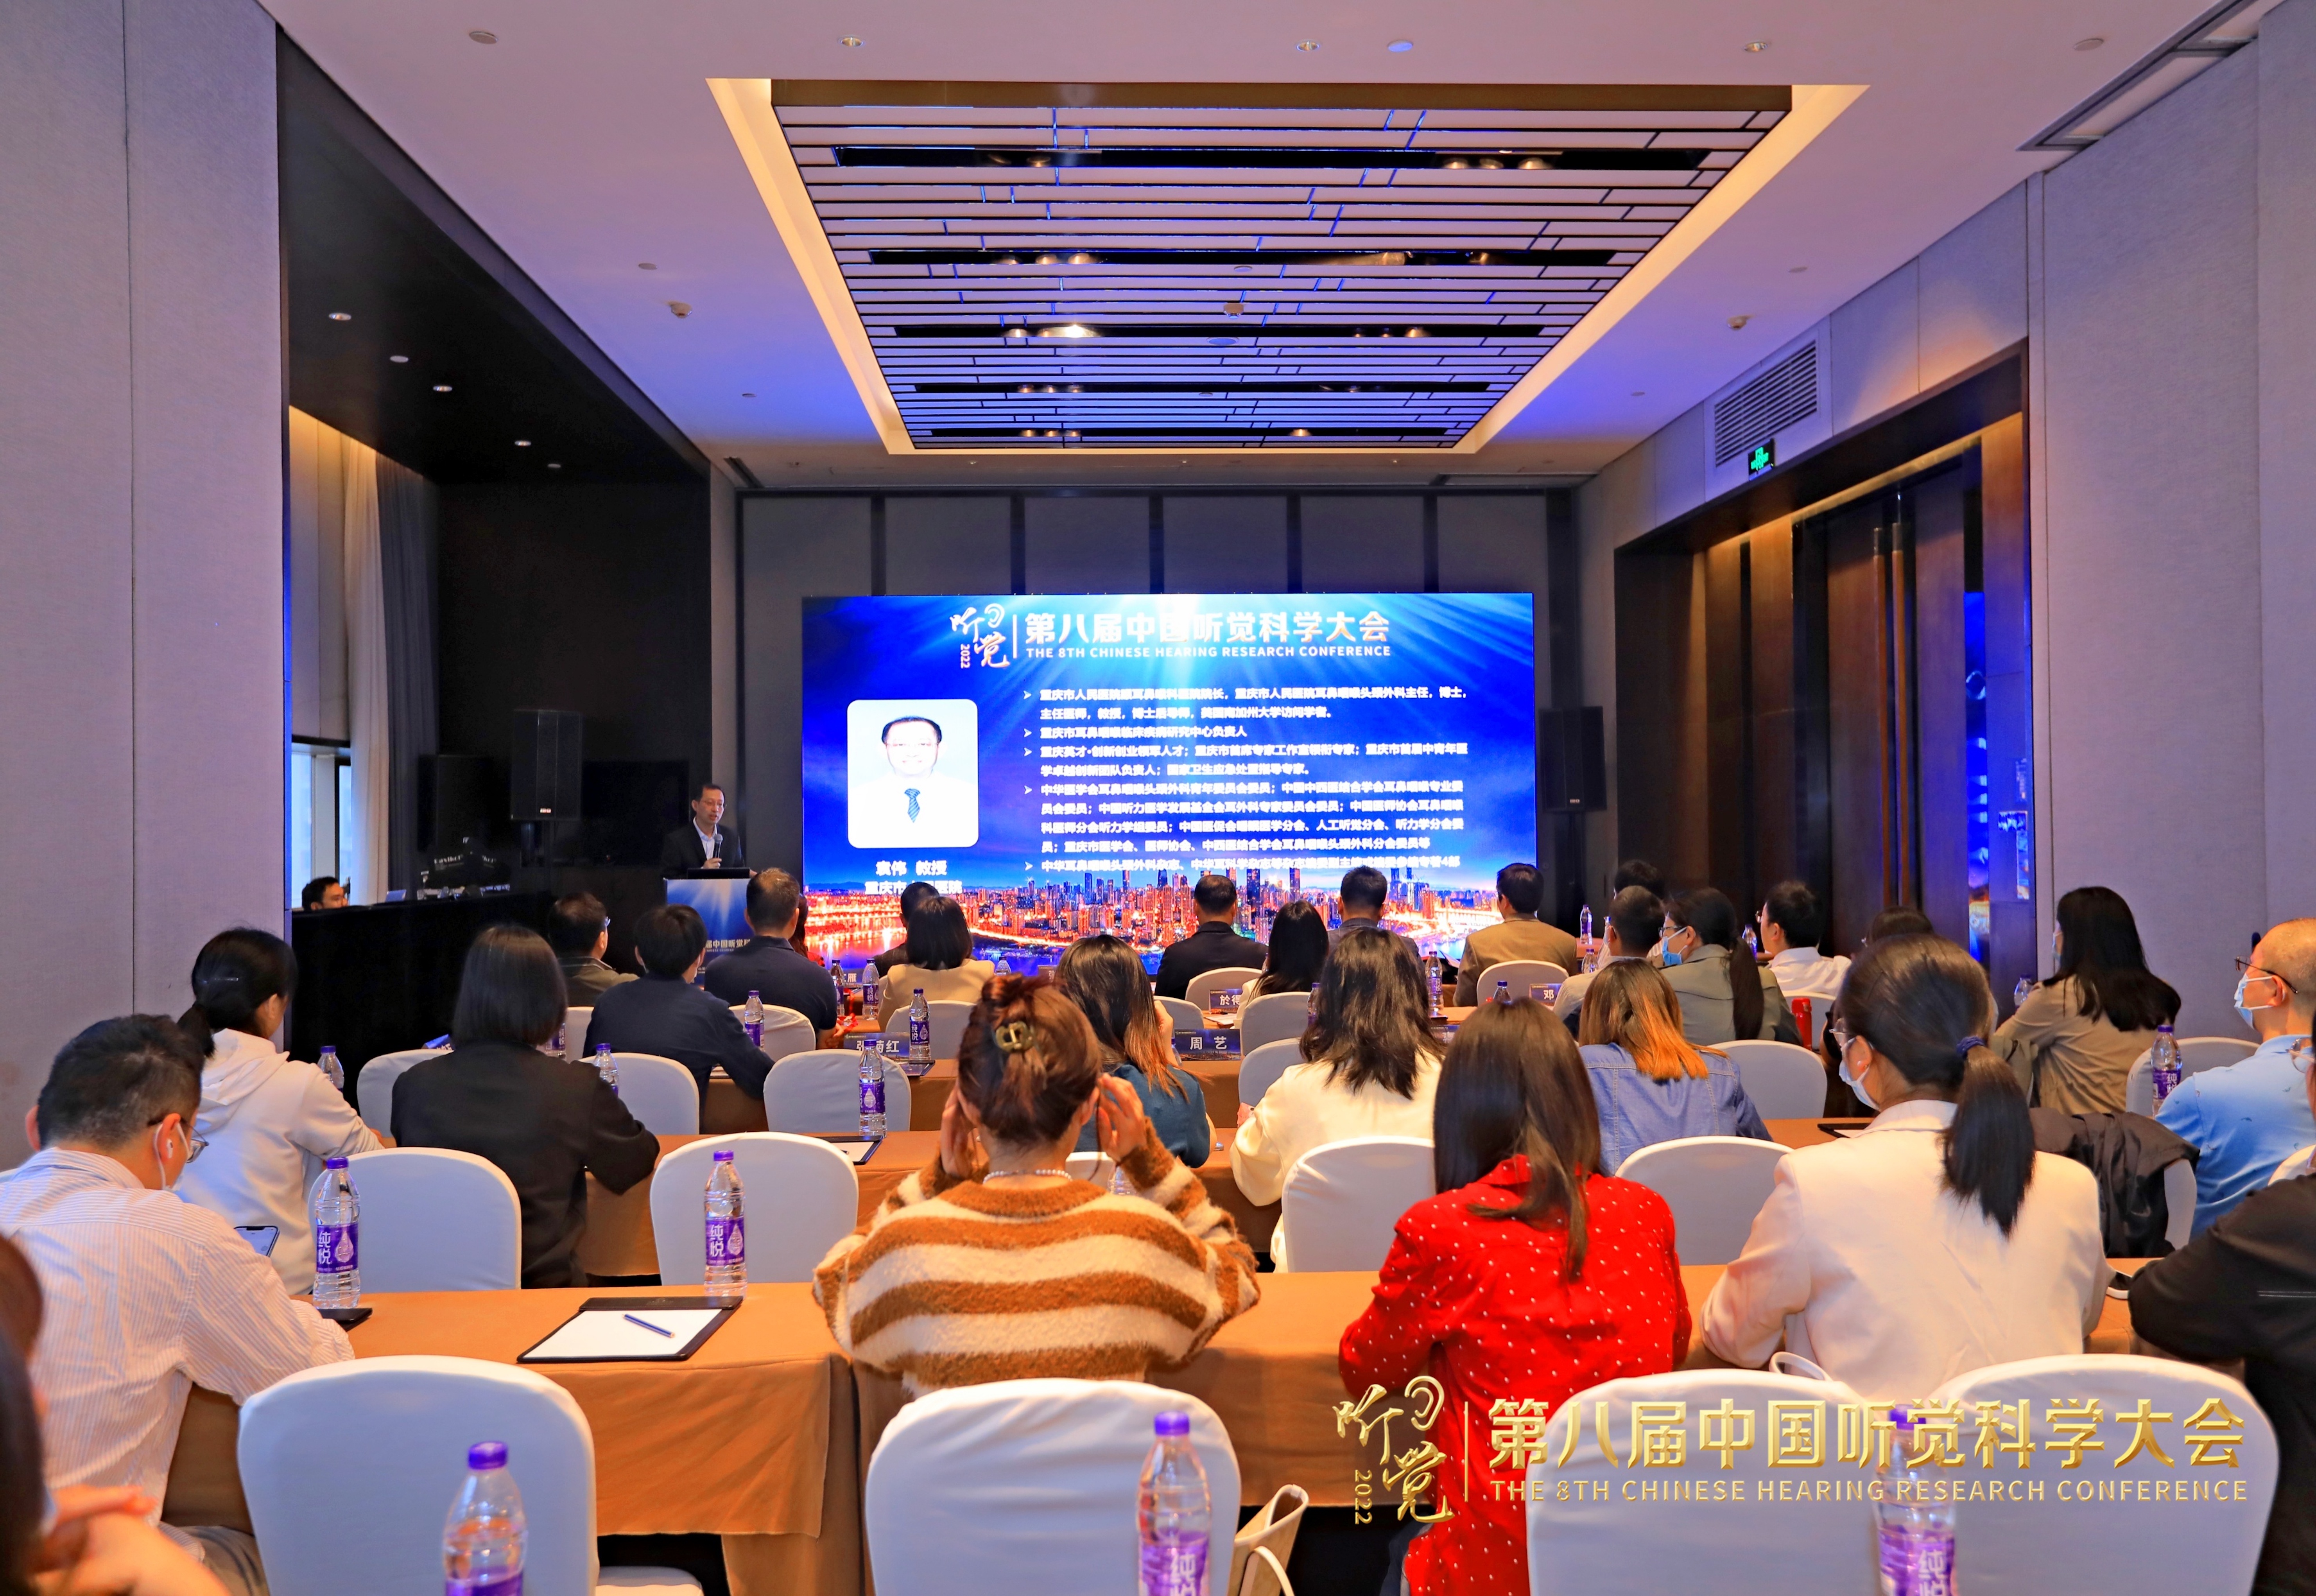 Eighth Chinese Hearing Research Conference held in Chongqing